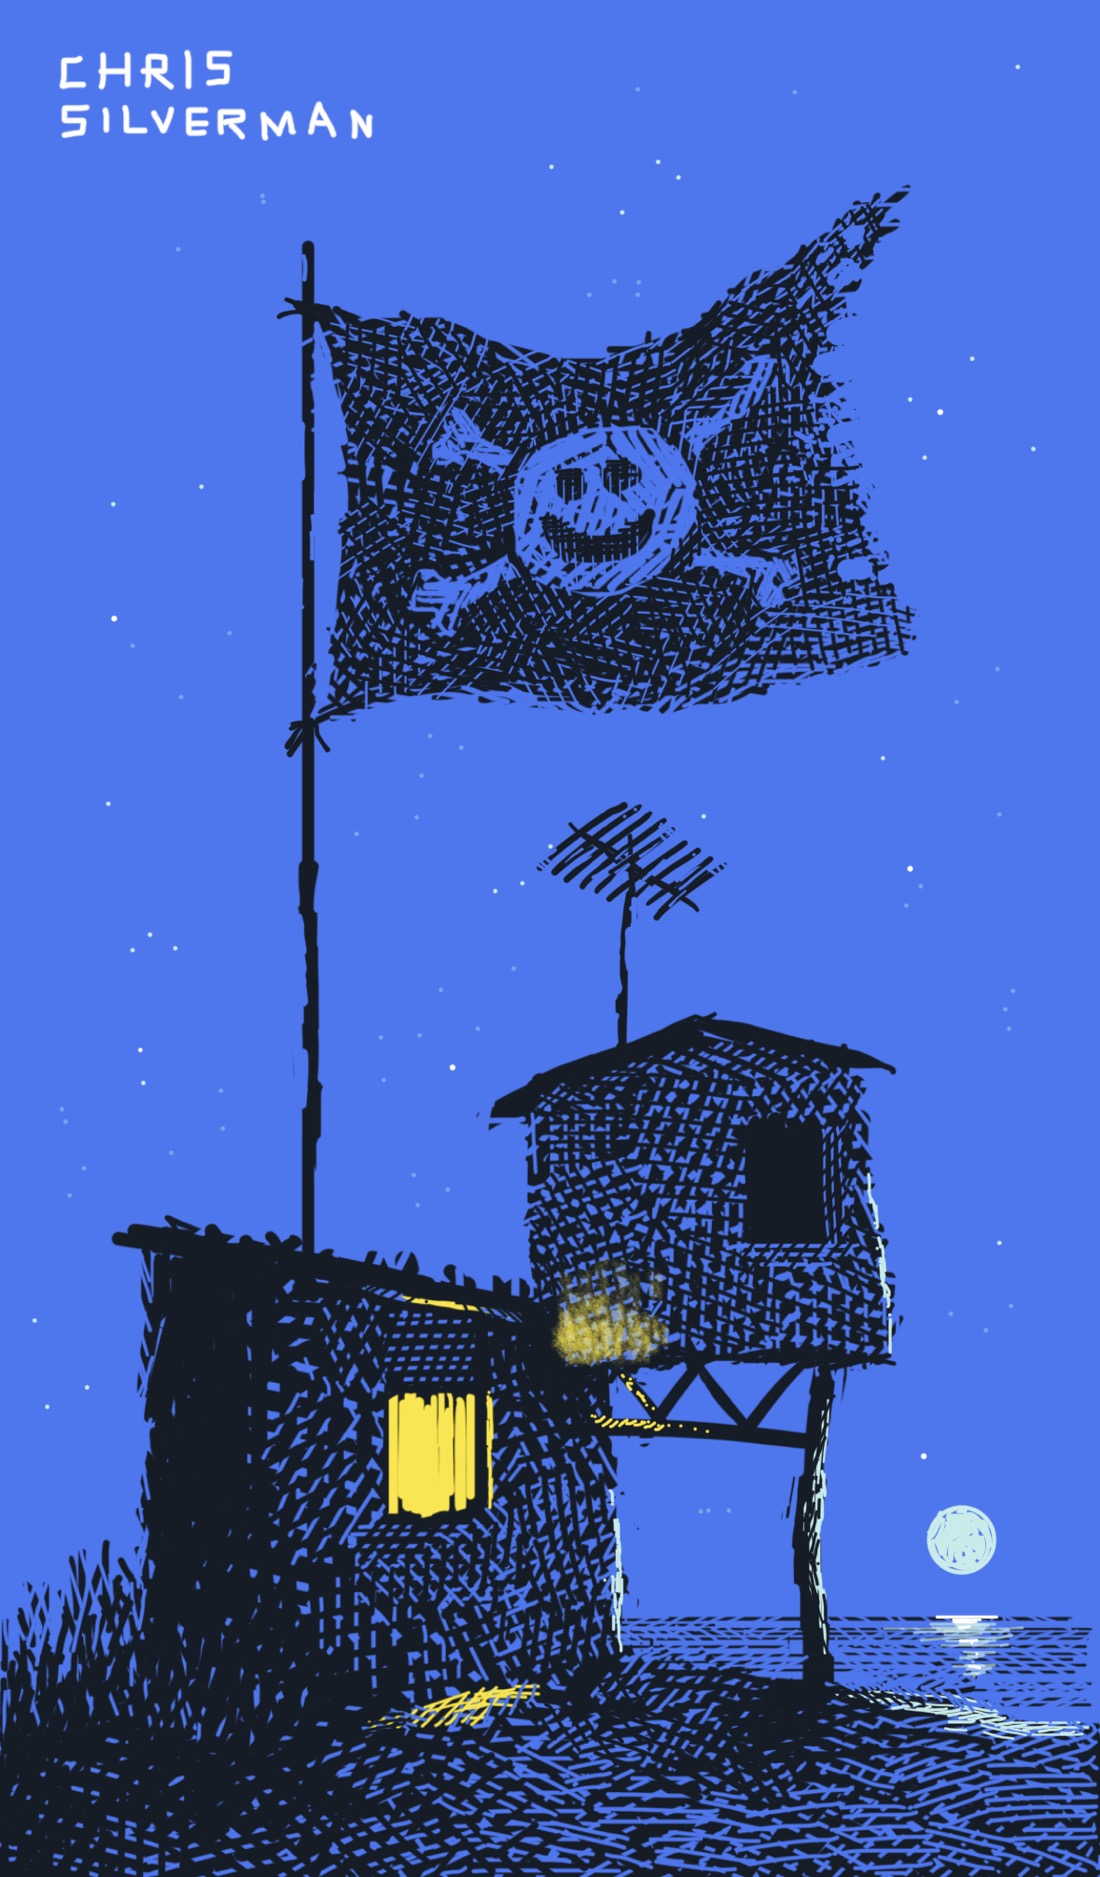 A scene at night. A ramshackle construction sits on a beach: a small shack, with another shack raised on stilts, fused into one corner of the first one. Both have windows, but the window in the ground-floor shack is lit. A television aerial is planted on the roof of the second shack. Flying over both of them is a large pirate flag, fixed to a pole emerging from roof of the ground-floor shack. This is a slightly different design of a pirate flag, though: instead of a skull, there's a smiley-face. The moon sits right above the horizon, reflecting on the ocean, either rising or setting. The drawing is rendered in black ink; the lit window is yellow; the moon is a pale white, and the rest of the scene is dark blue.